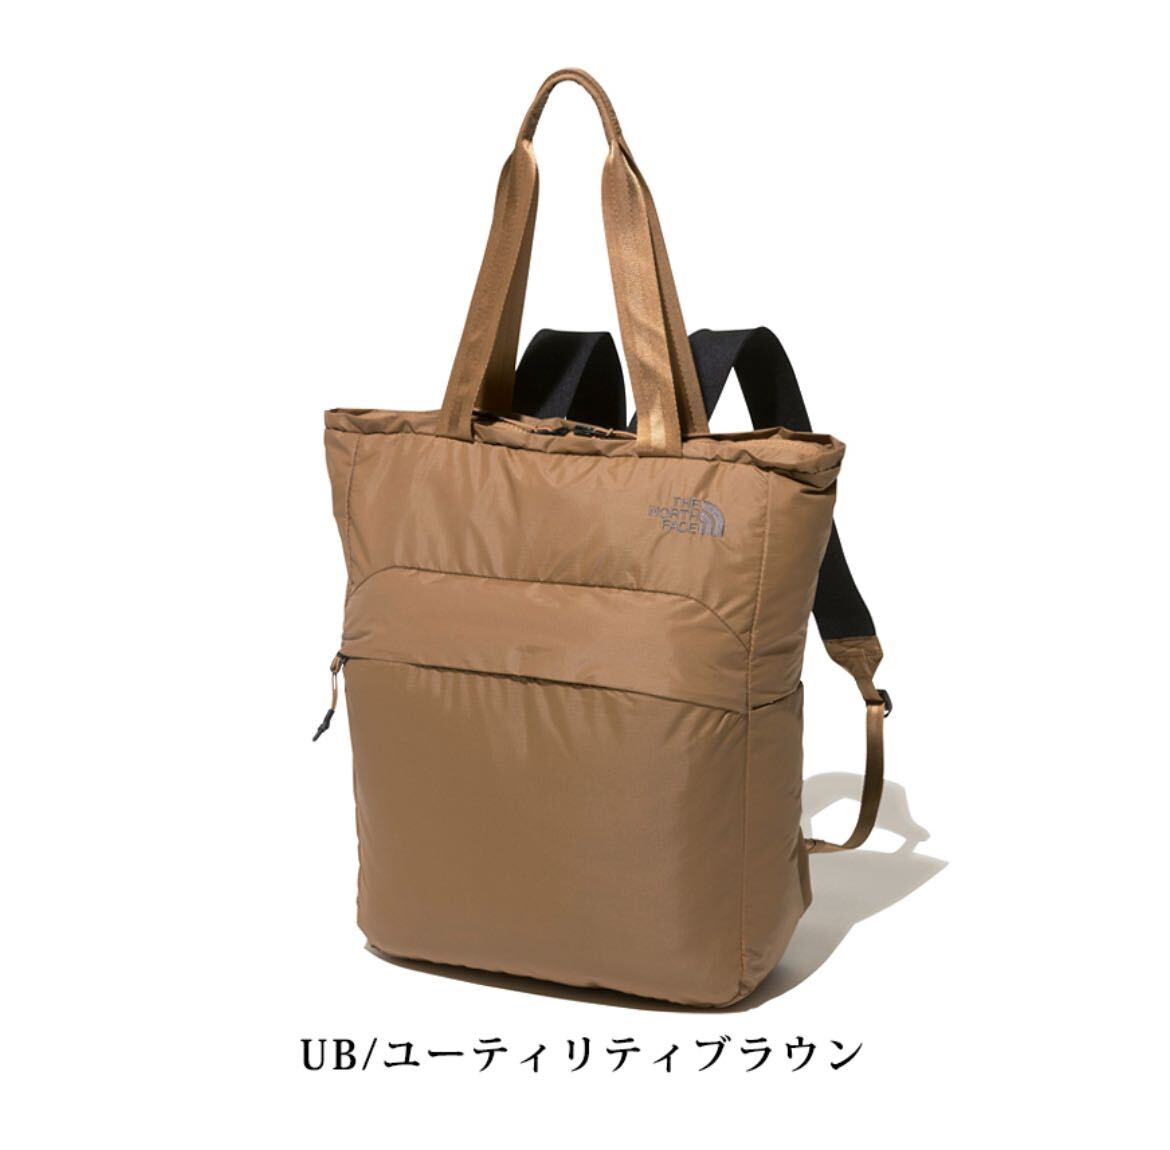 NORTH FACE GLAM TOTE 18L 2wayバックパック の画像7